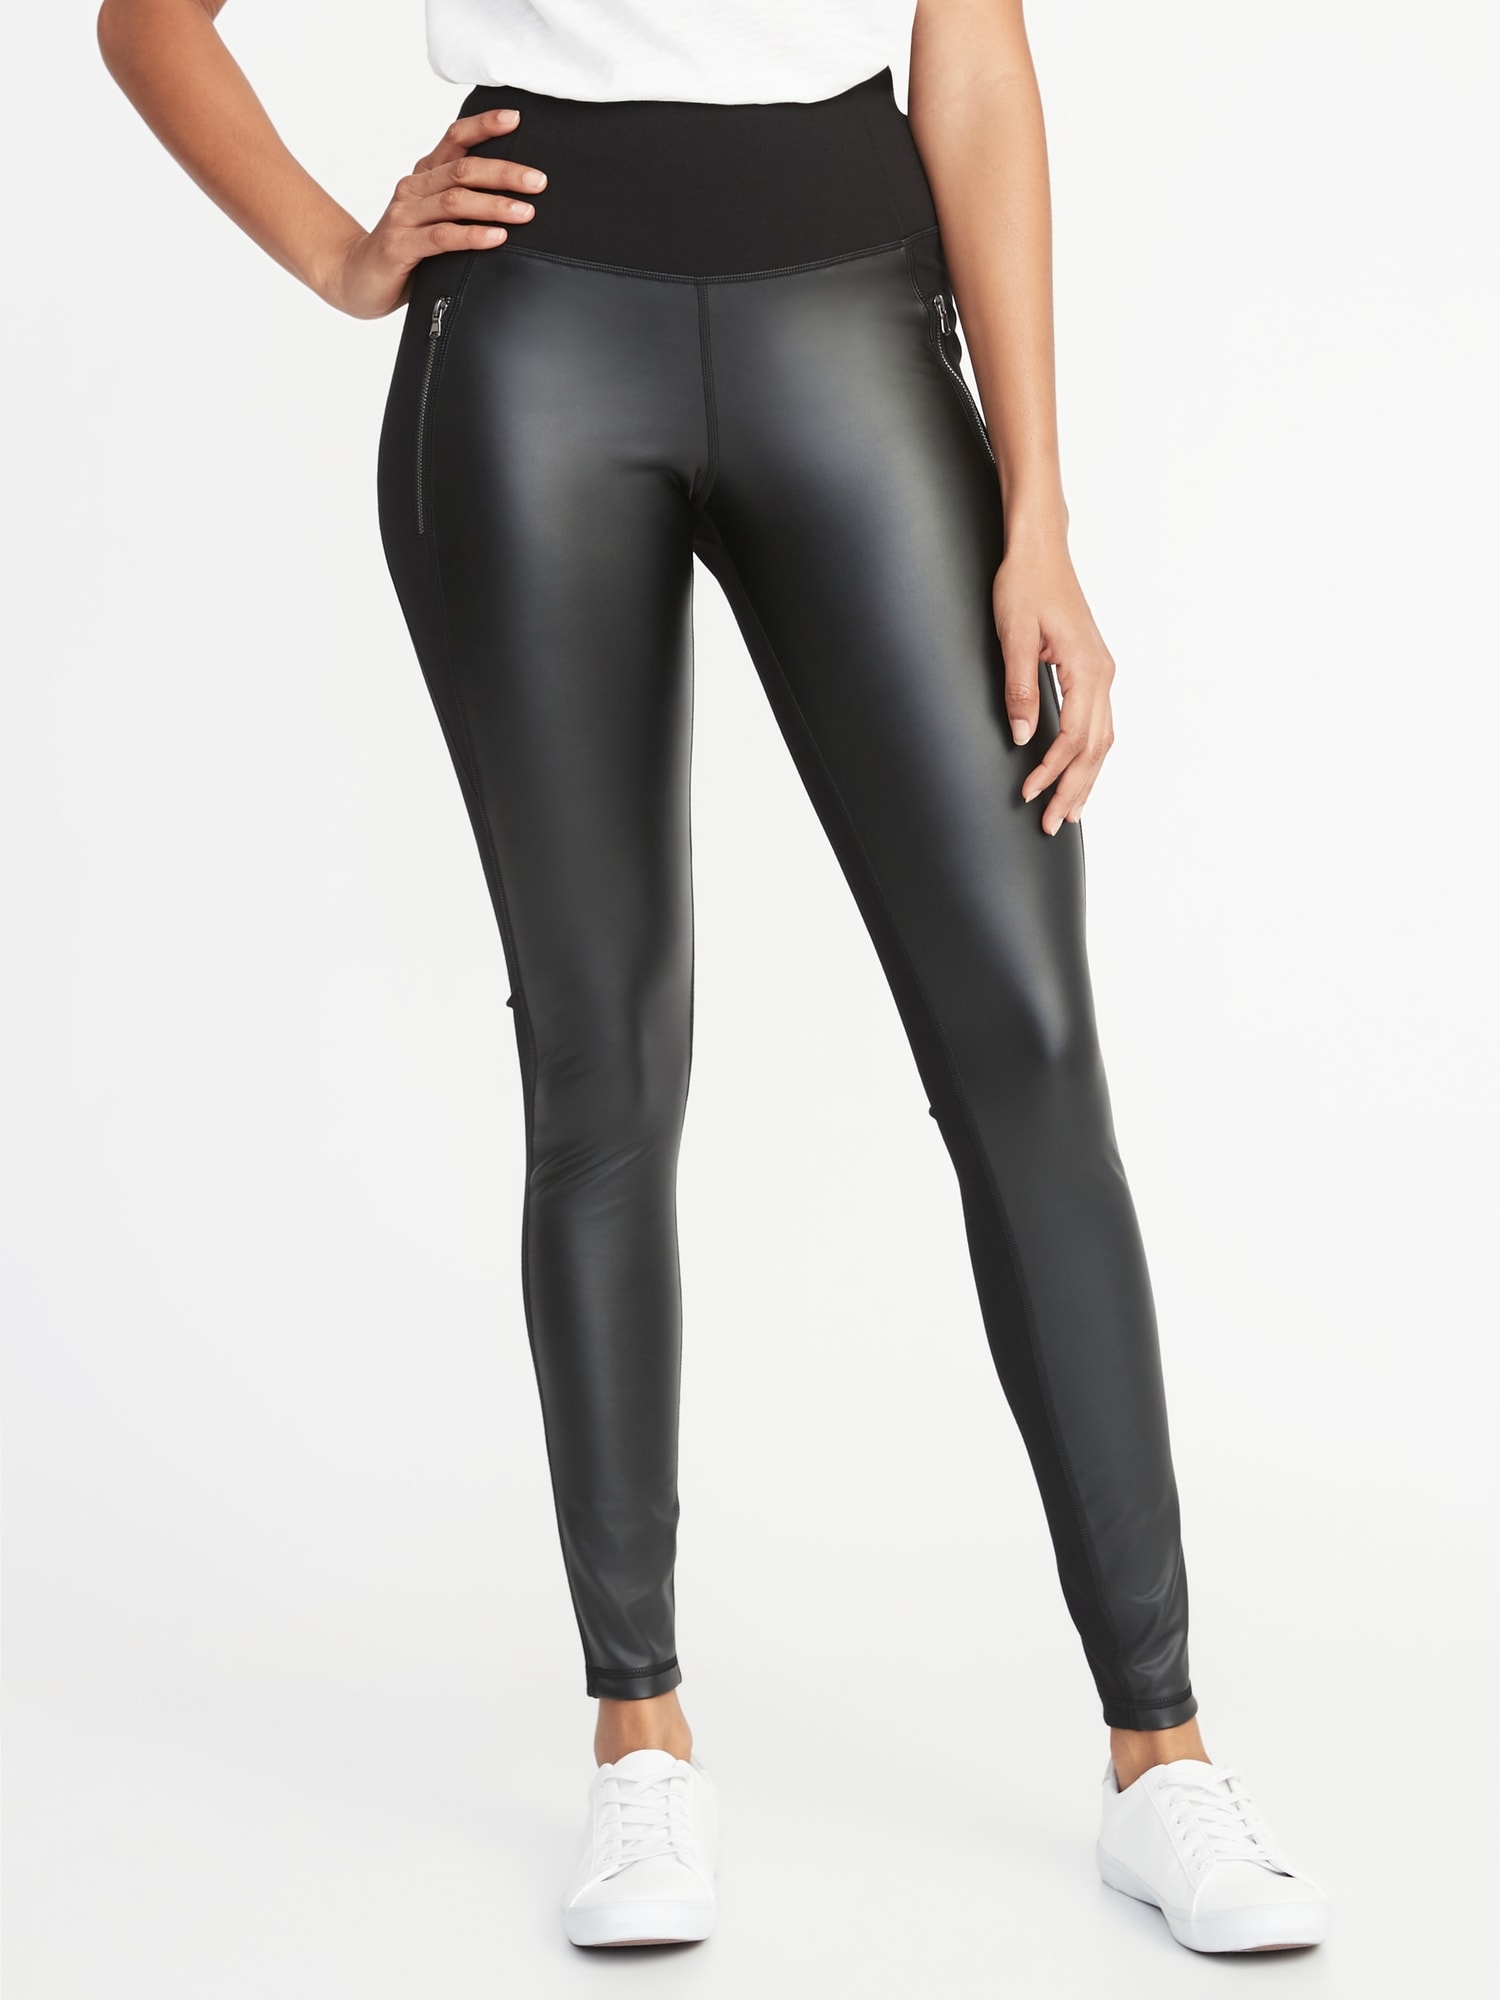 Old Navy High-Waisted Faux-Leather Leggings for Women